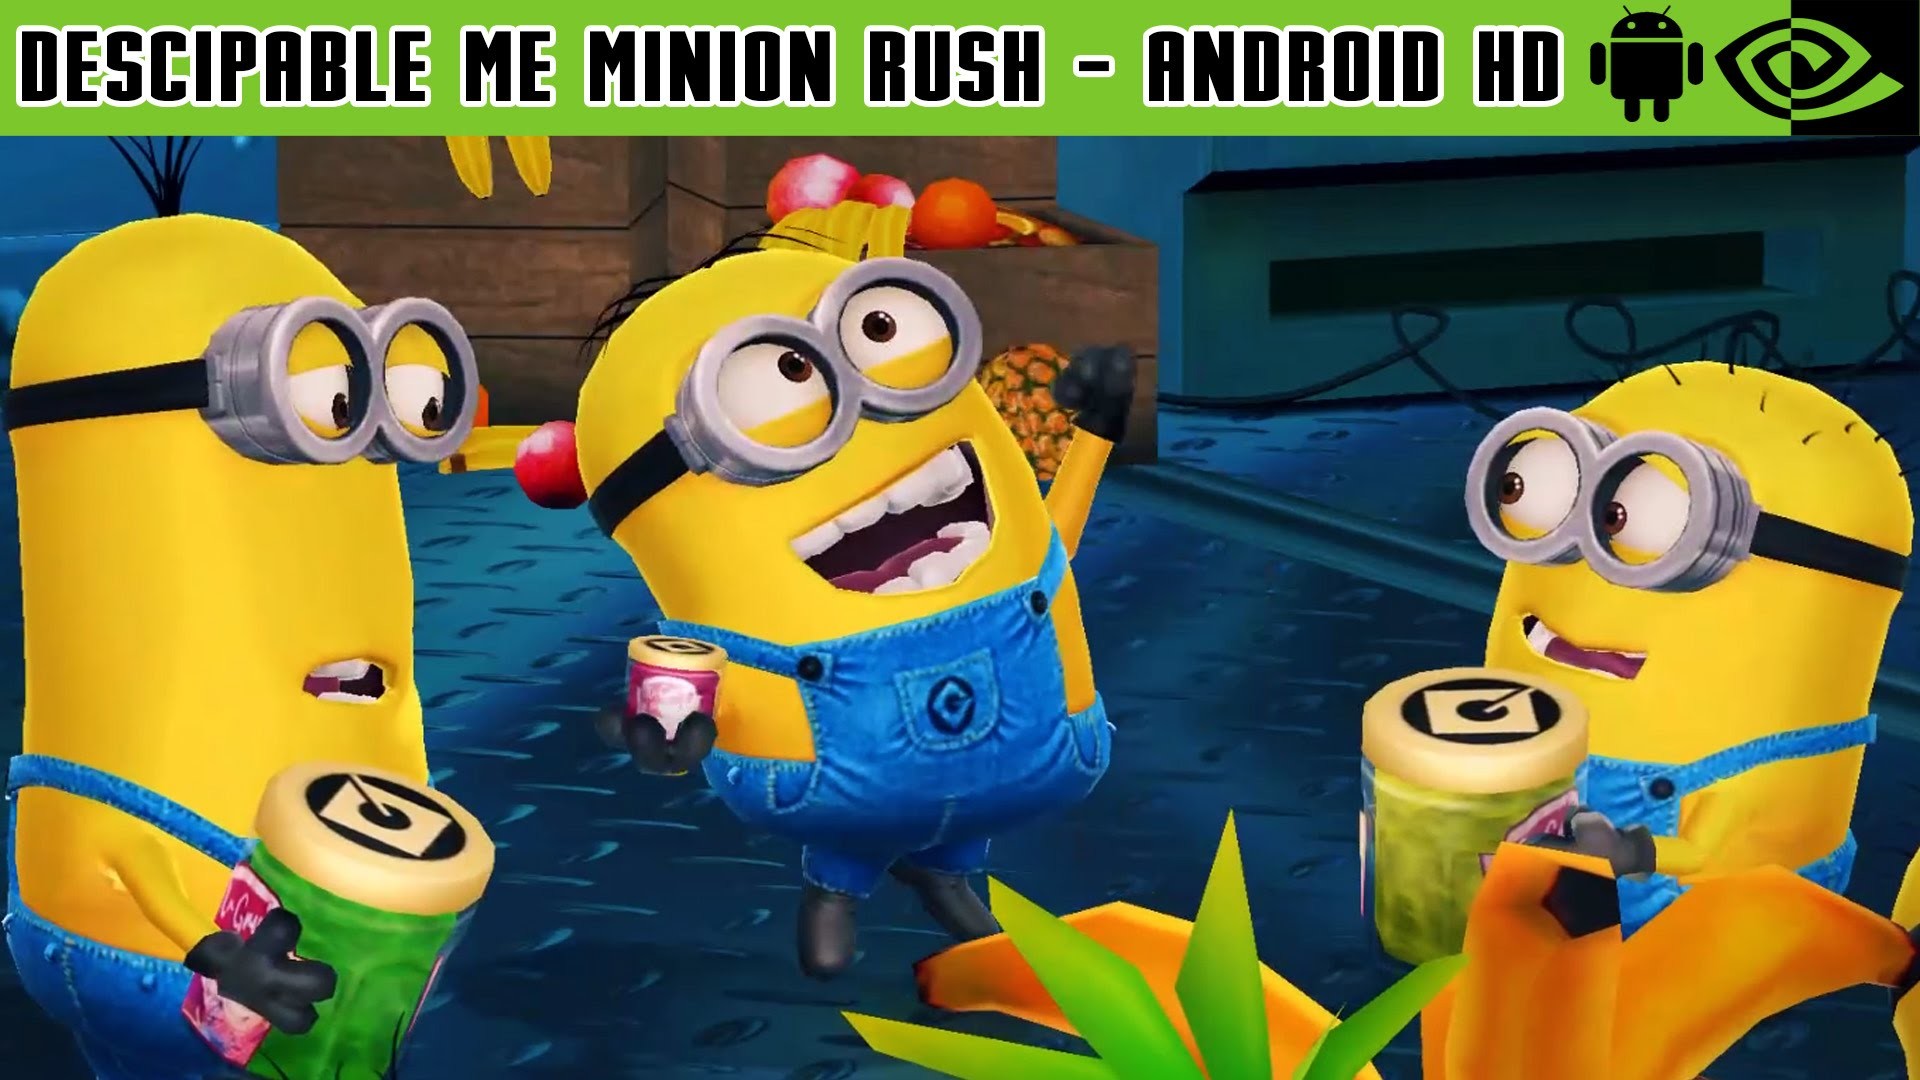 1920x1080 Descipable Me Minion Rush - Gameplay Nvidia Shield Tablet Android 1080p ( Android Games HD) - YouTube